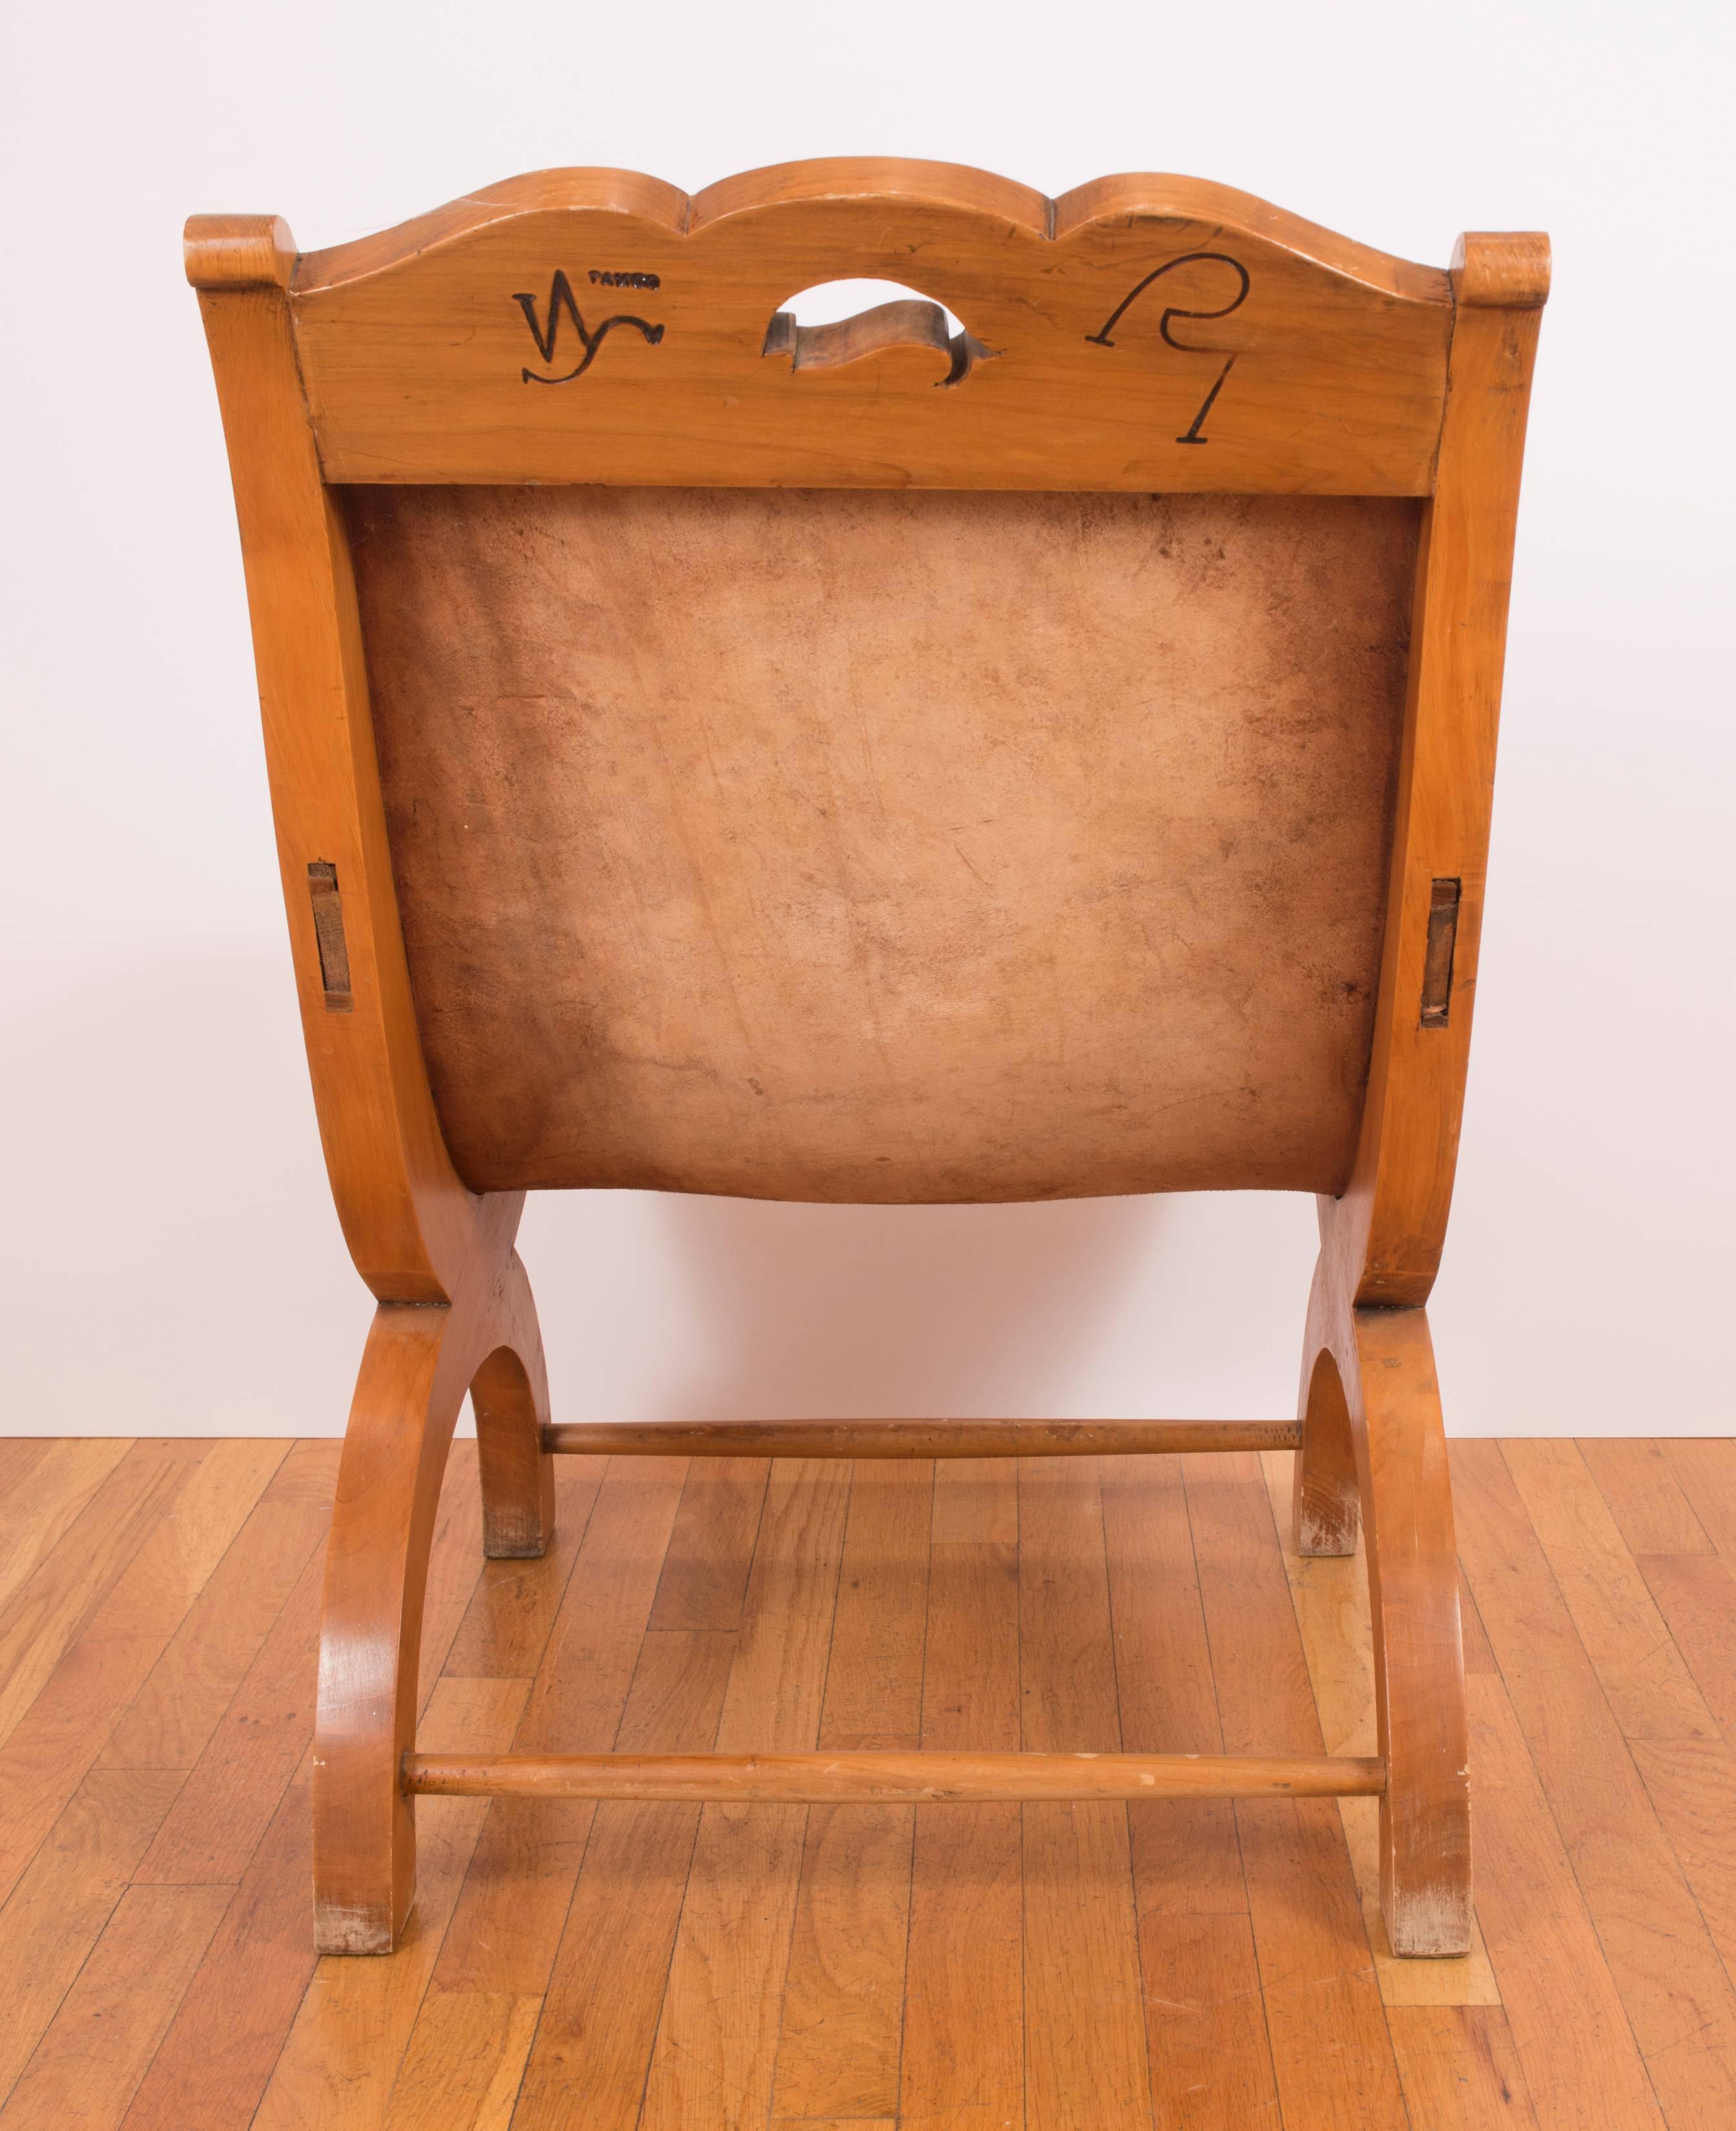 Sabino wood and tanned leather.

“Butaquito” chair by William Spratling (1900-1967), American-born designer who became known as the father of Mexican modernist jewelry after his move to Taxco in 1928. In the early 1930s, Spratling created a modern